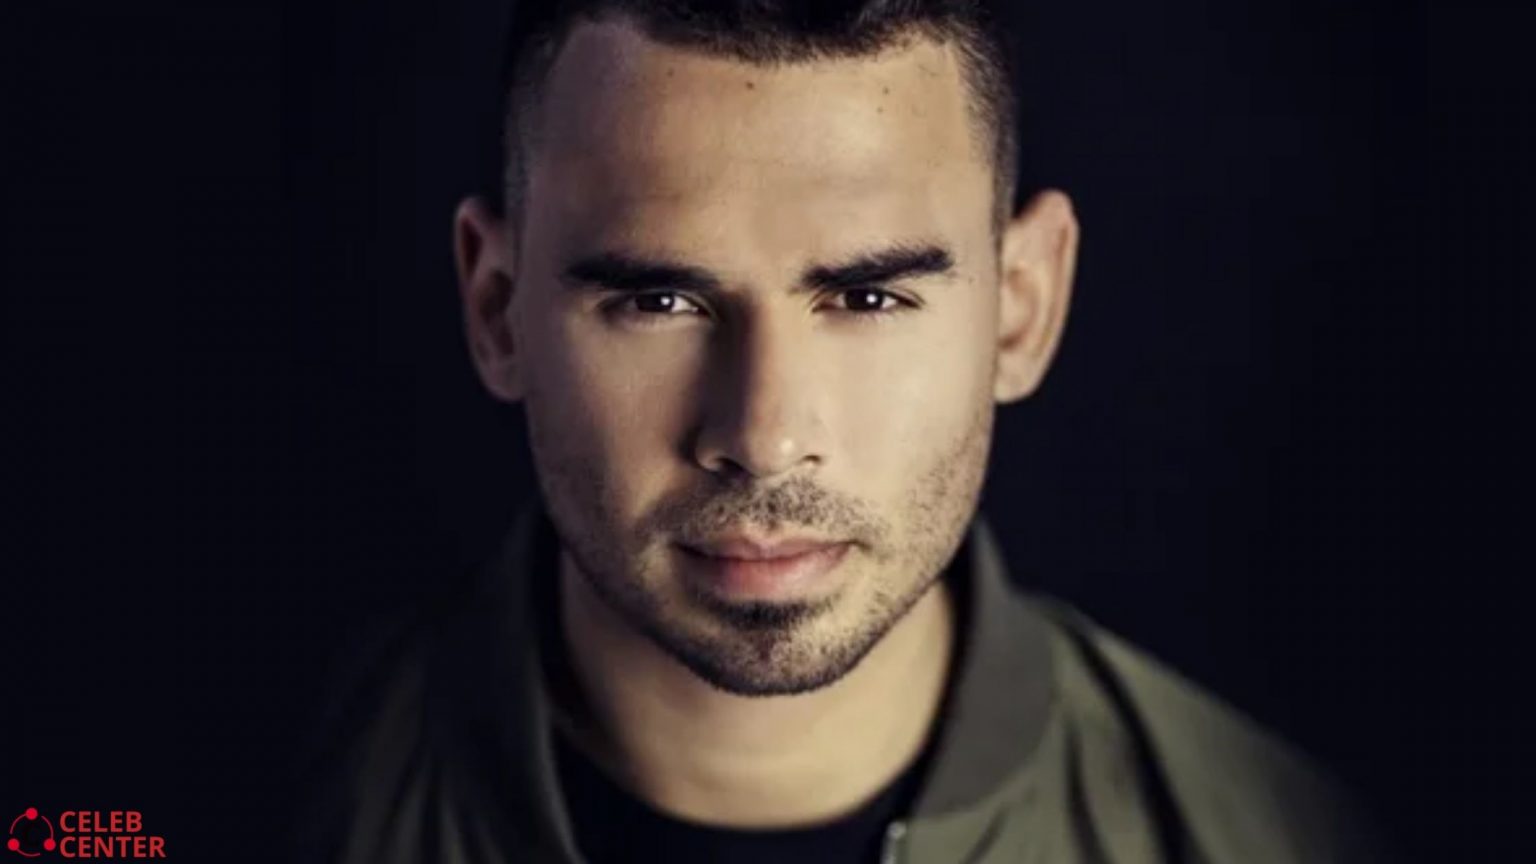 Afrojack Biography, Age, Height, Family, Wife & Net Worth Celeb Center